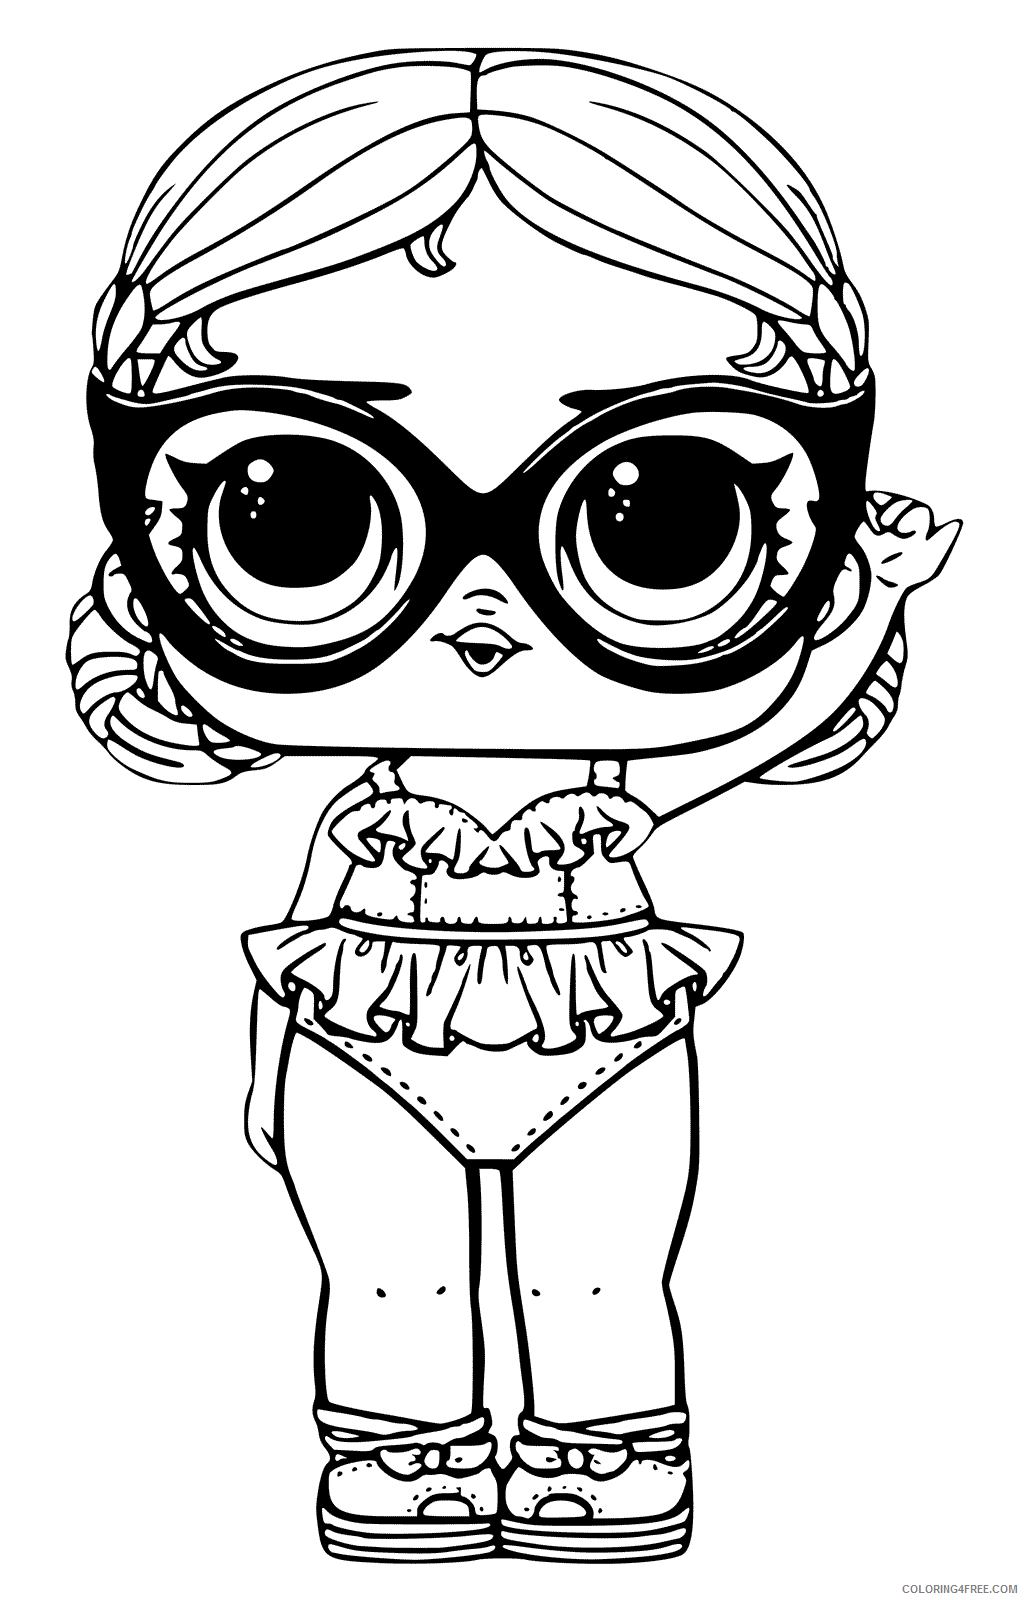 LOL Dolls Coloring Pages for Girls Color LOL Dolls Printable 2021 0776 Coloring4free